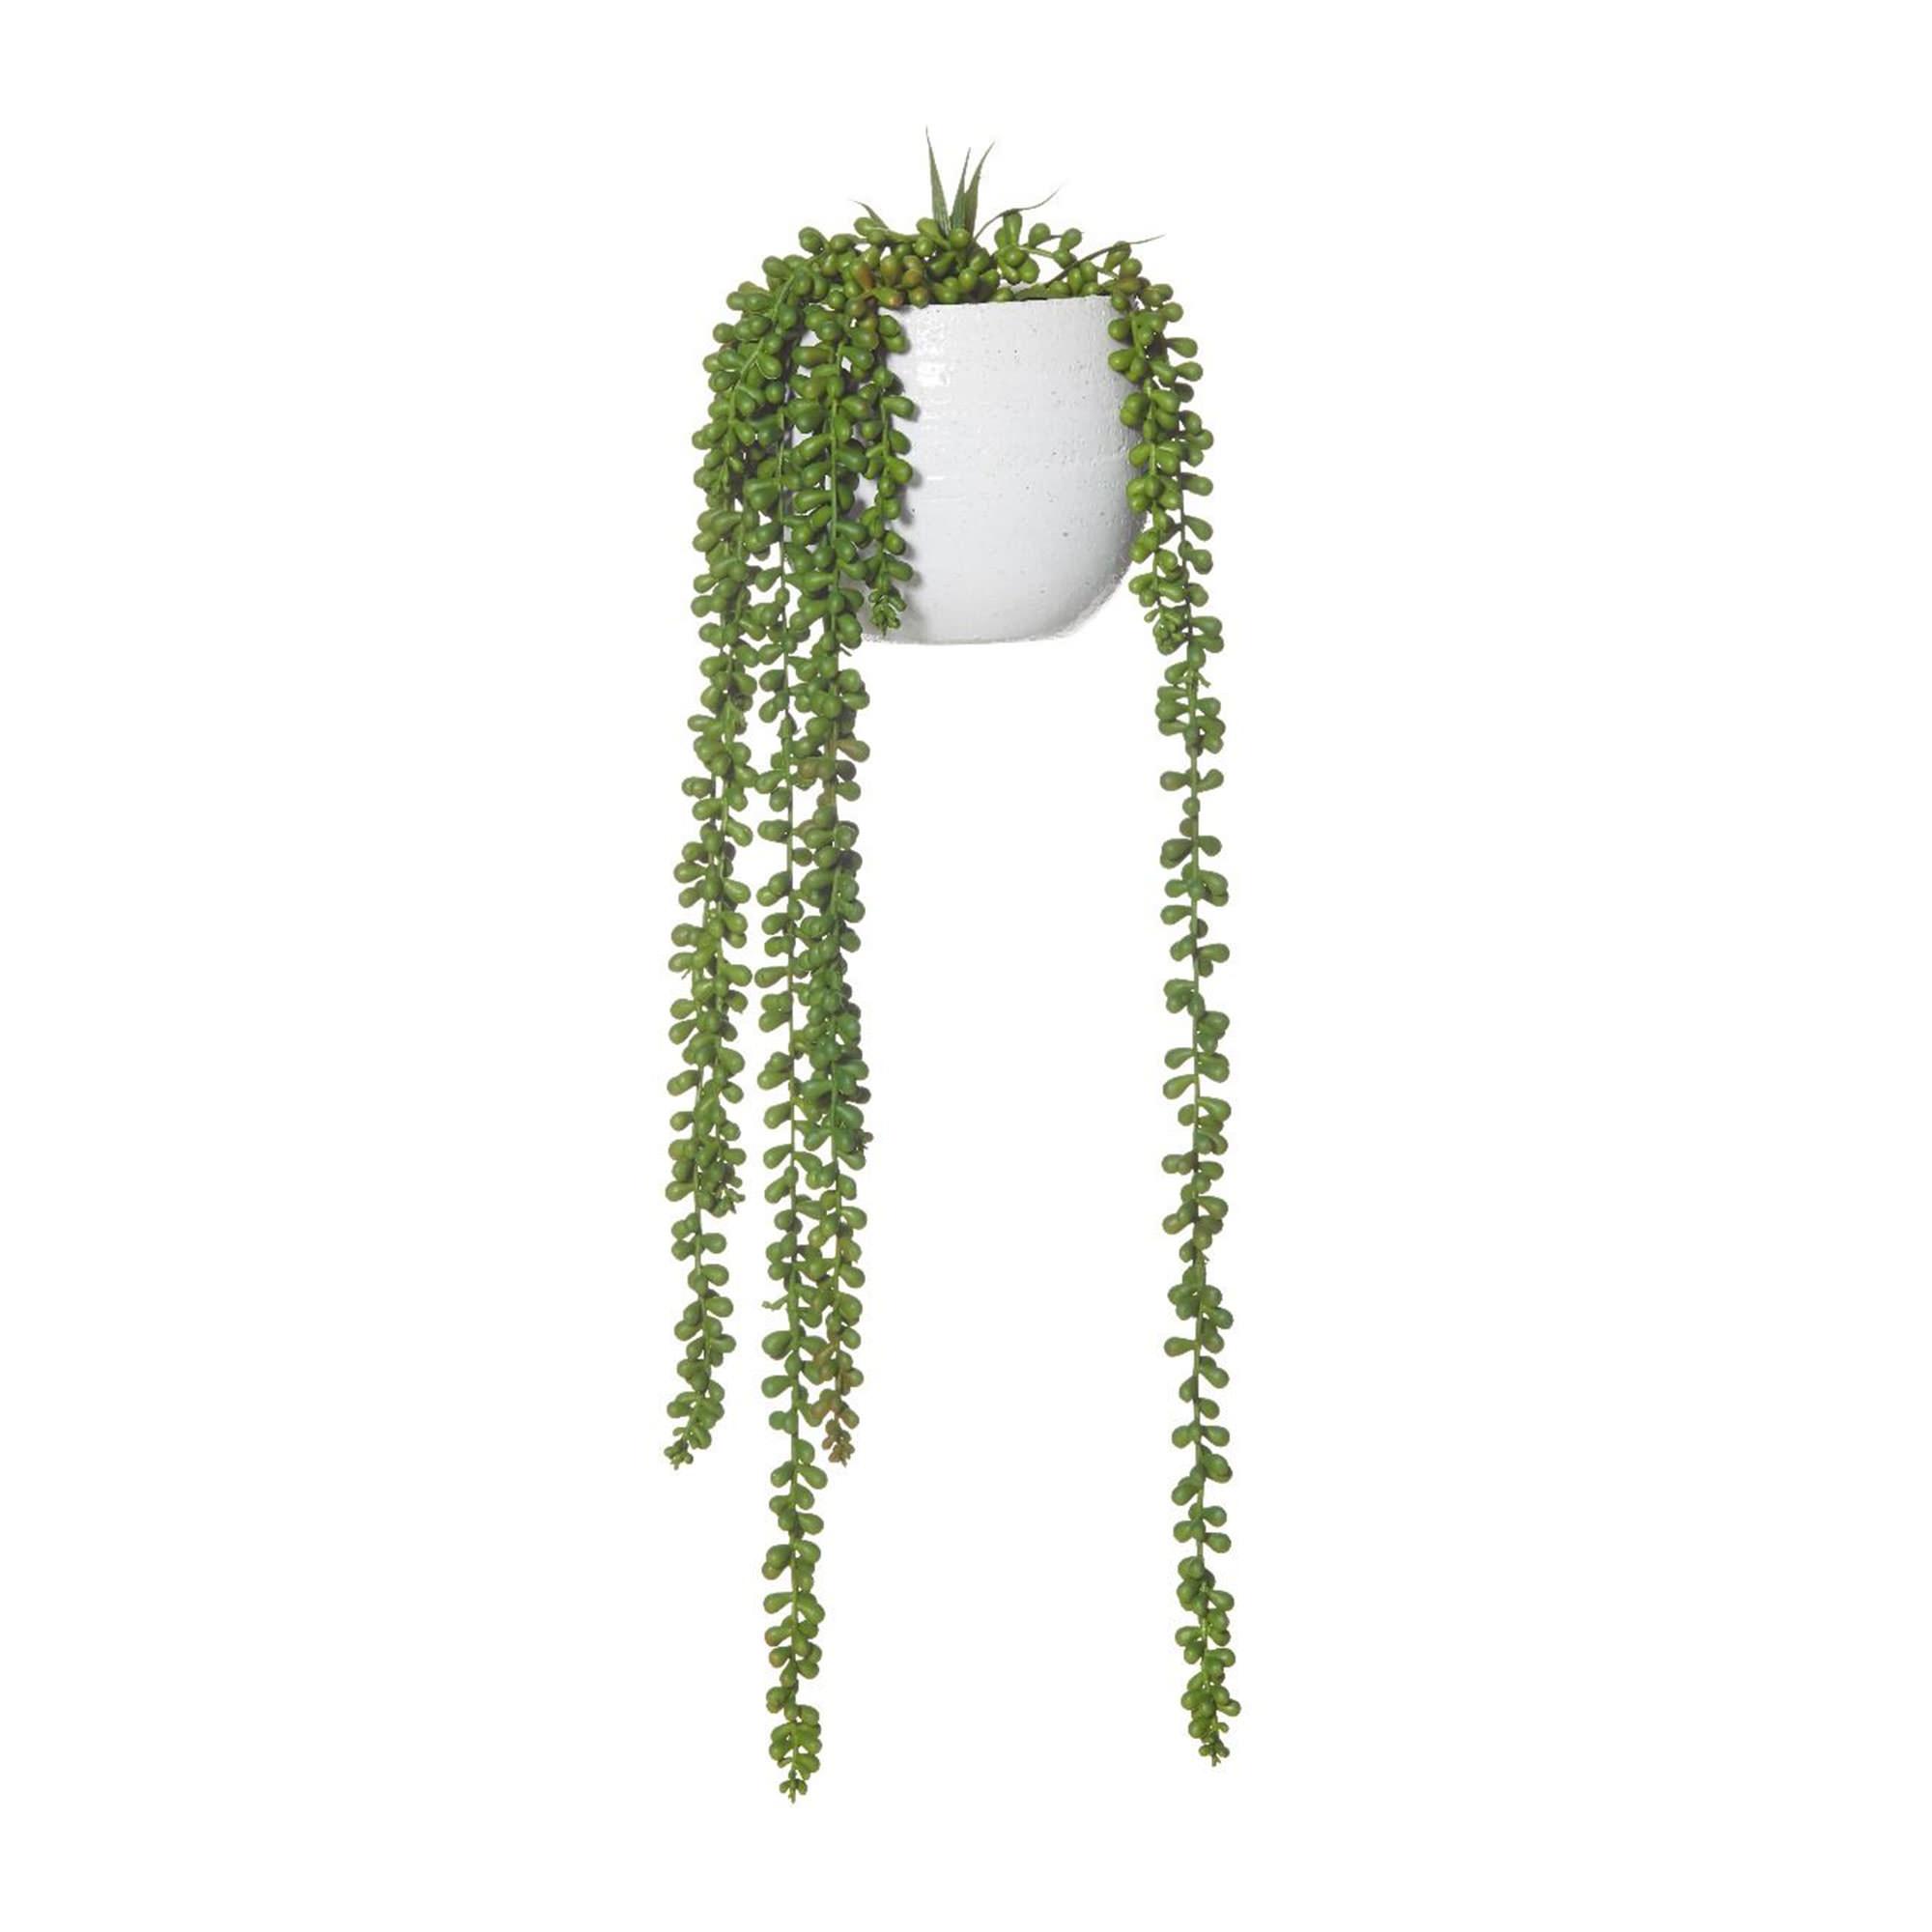 Rogue Hanging Pearls in Pot 66cm White Image 1